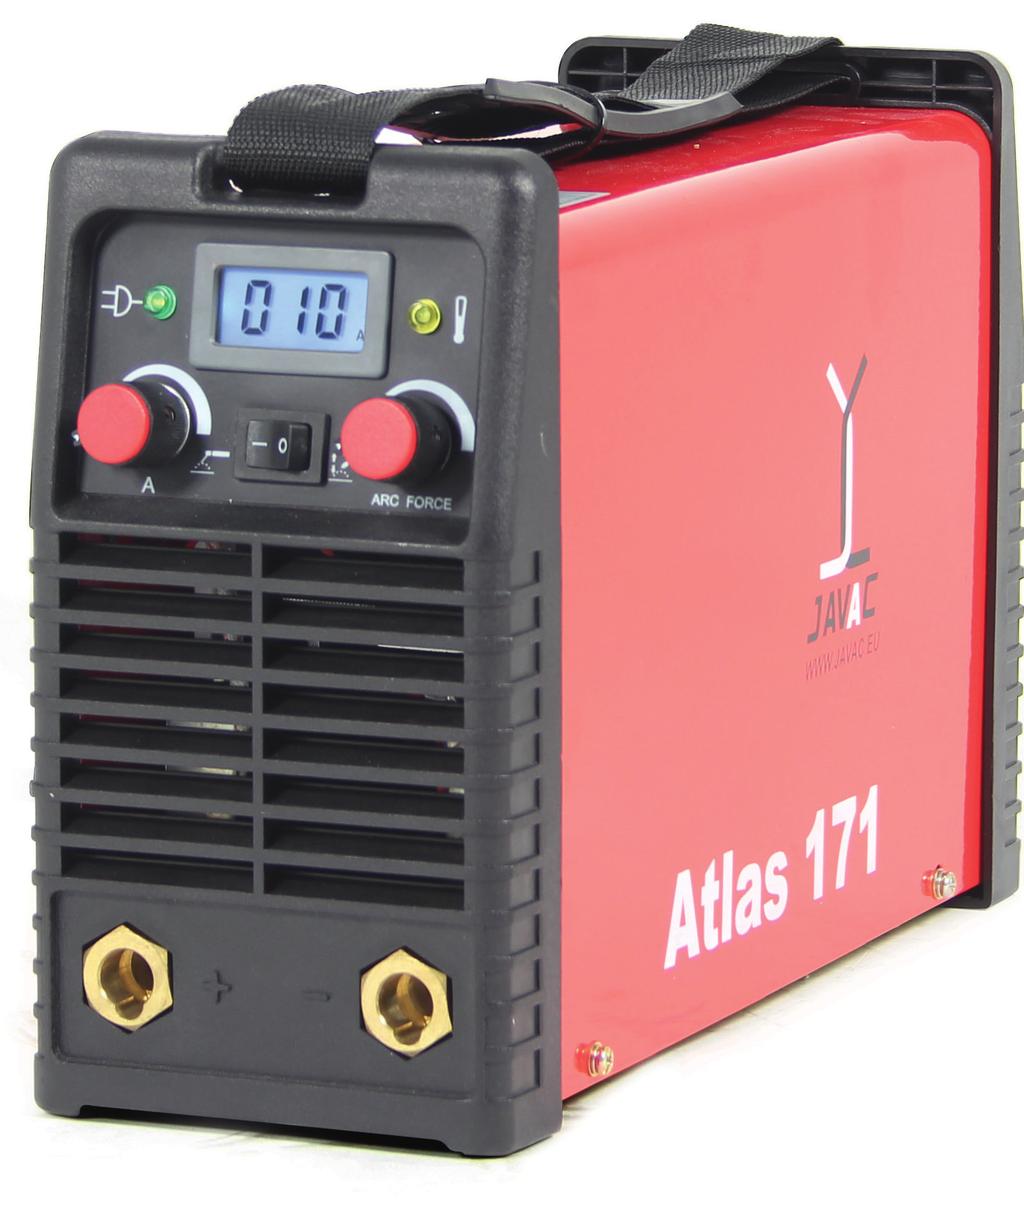 PROFI E-WELDING INVERTER until revocation ATLAS 171 Small and powerfull The ATLAS 171 is a small MMA welding devices with low input current. JAVAC Deutschland GmbH www.javac-deutschland.